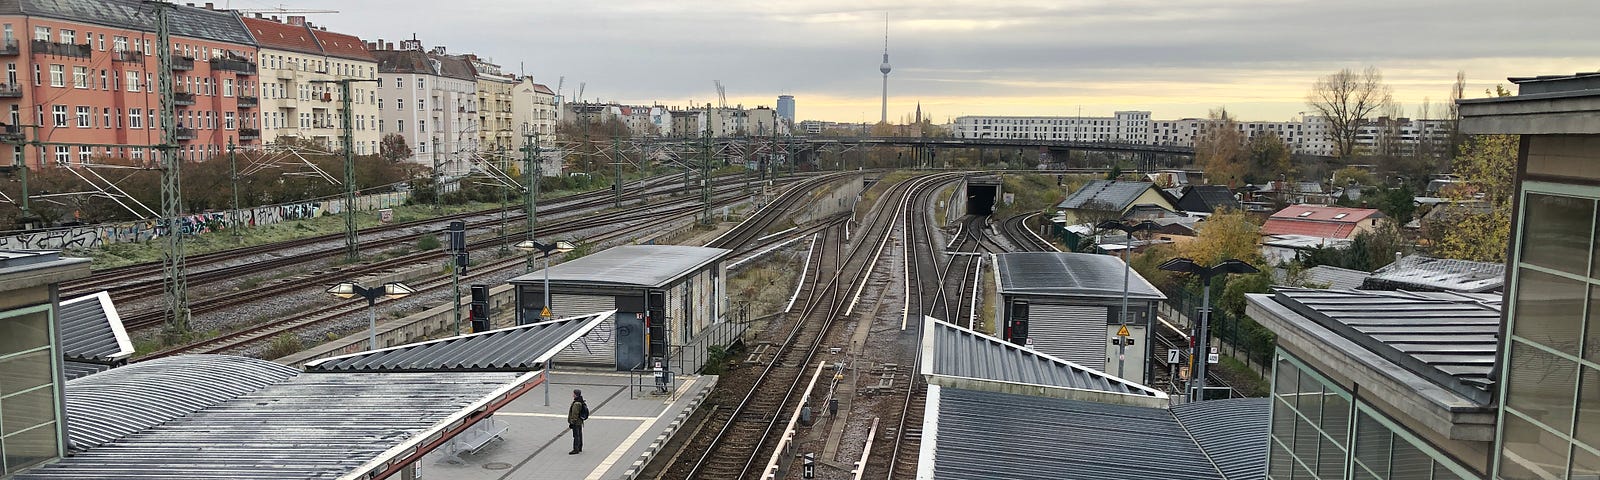 Berlin and the Fernsehturm in the background taken from a bridge above a train station